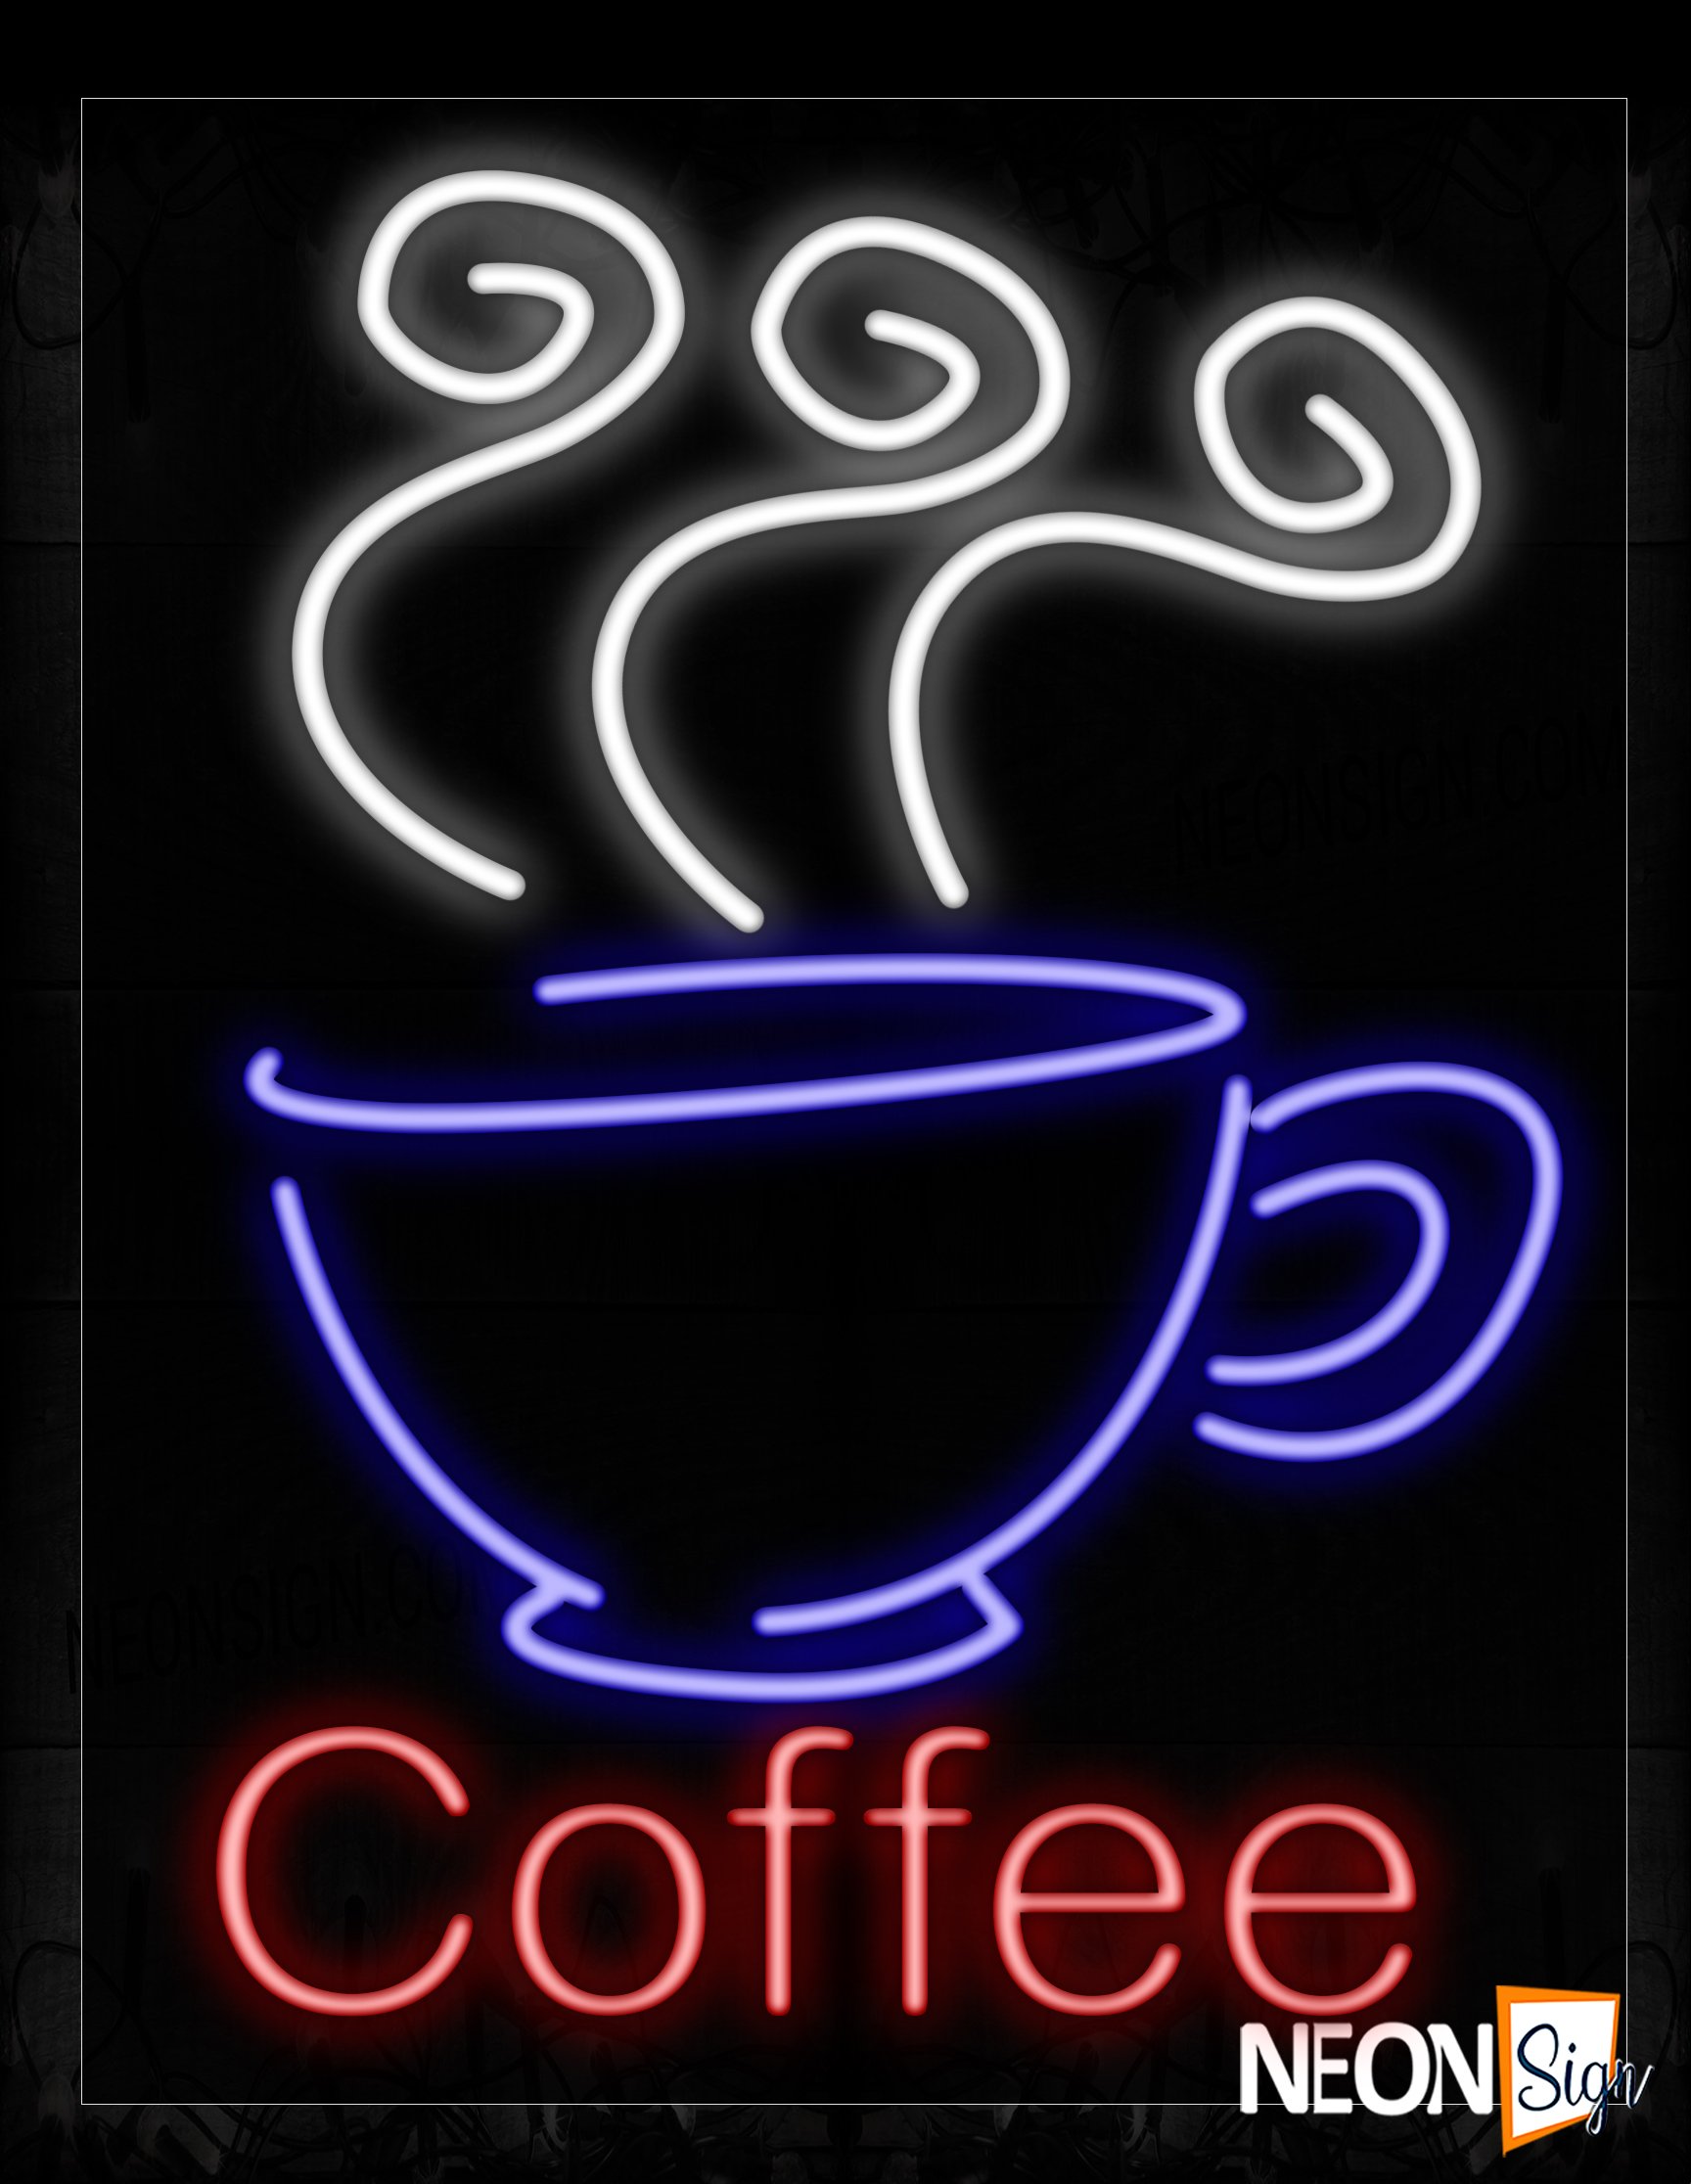 Image of 10430 Coffee With Cup Of Coffee Logo Neon Signs_24x31 Black Backing